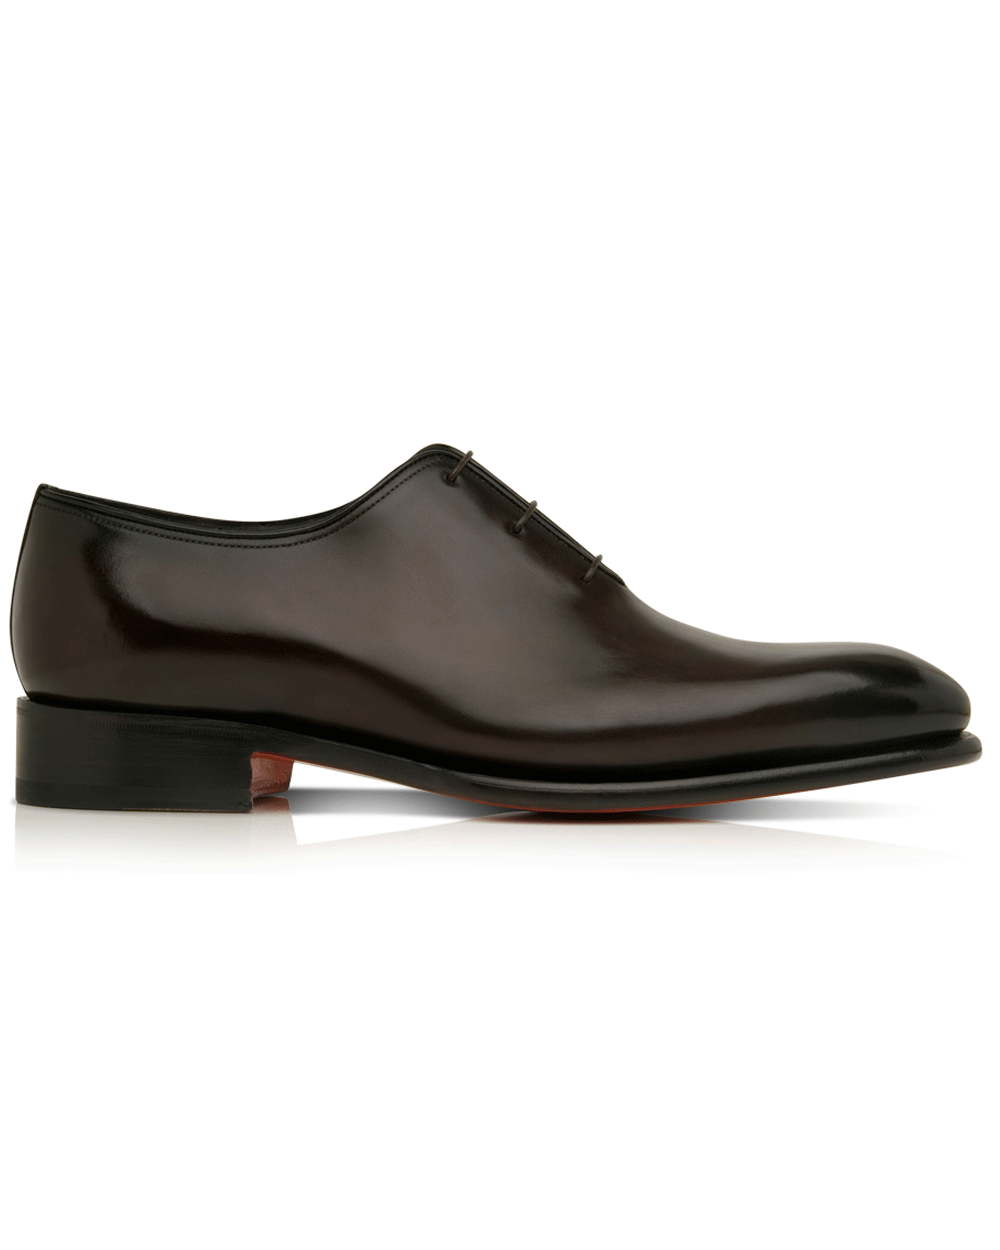 Leather Oxford in Dark Brown